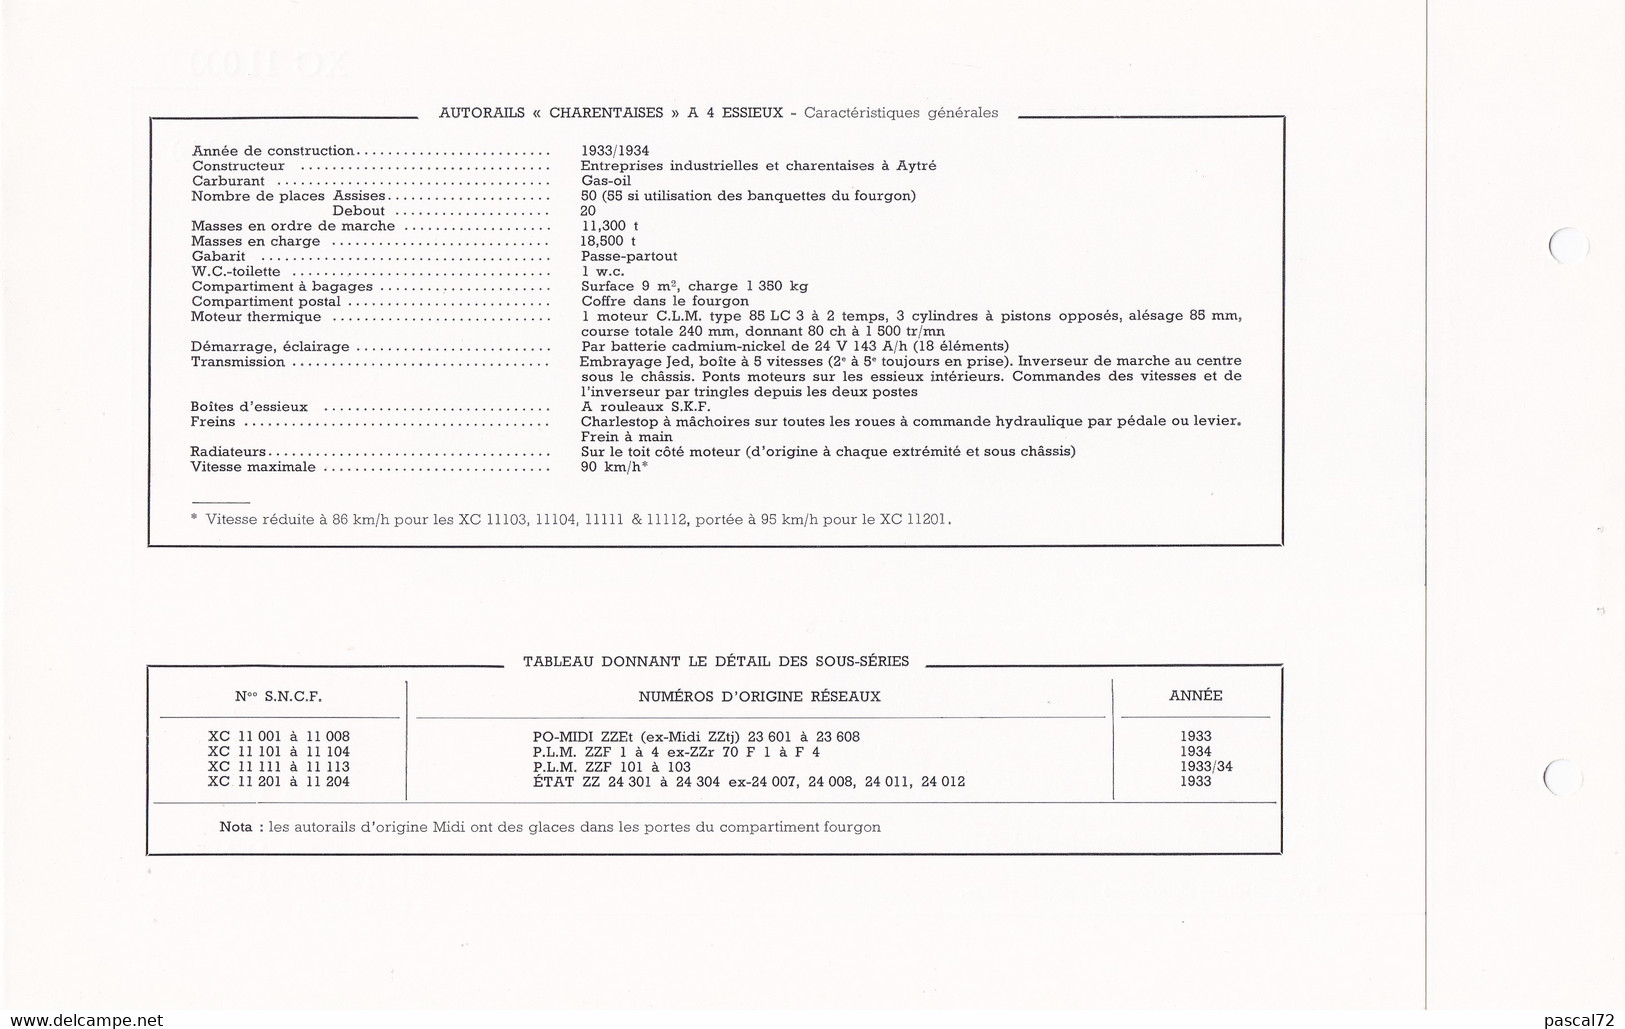 XC 11000 FICHE DOCUMENTAIRE DOUBLE LOCO REVUE N° 389/390 AVRIL 1972 - Francese